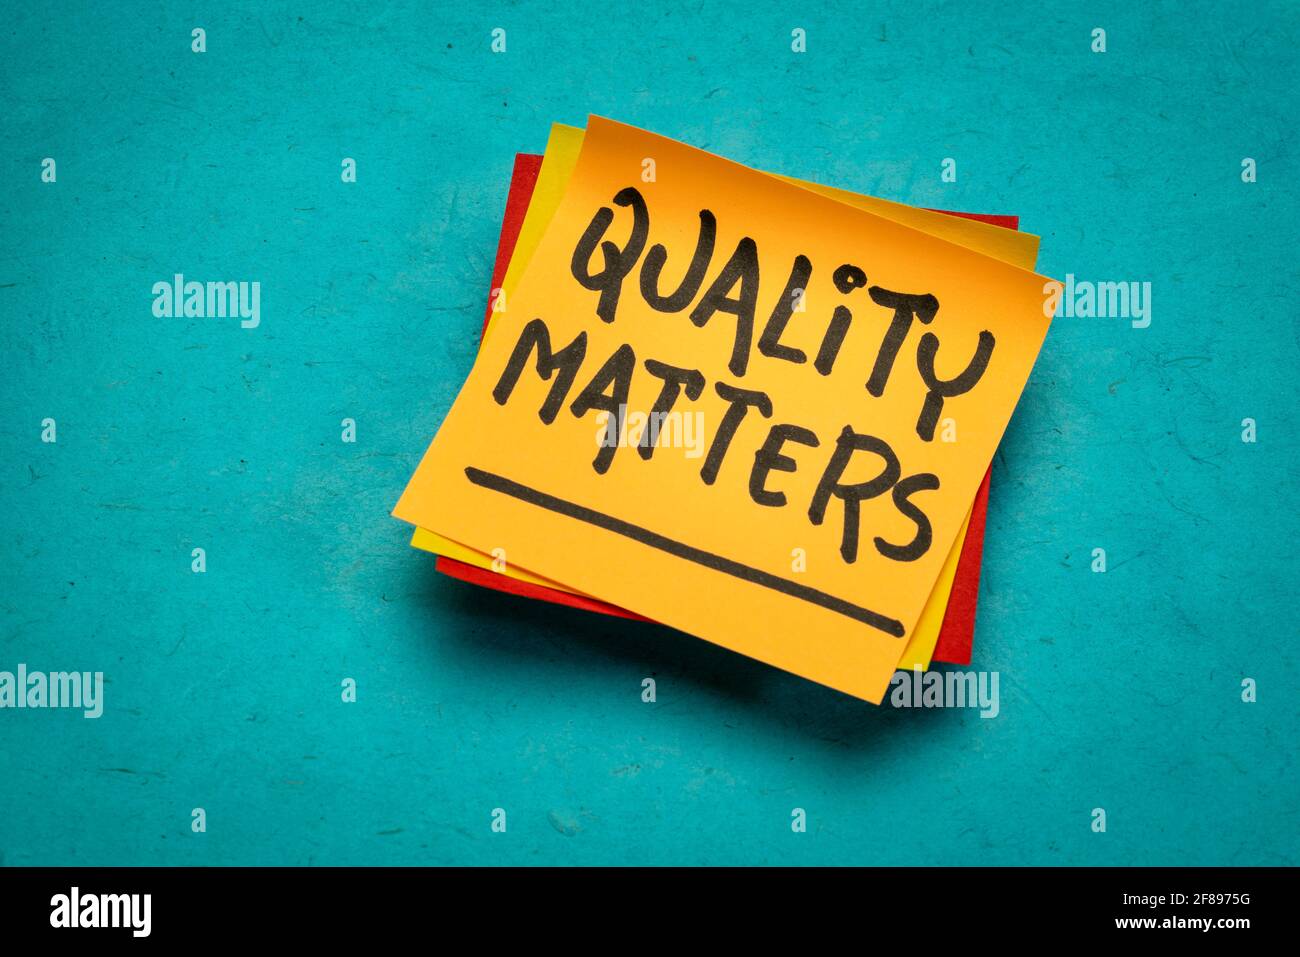 quality matters reminder note, business, lifestyle and personal development concept Stock Photo